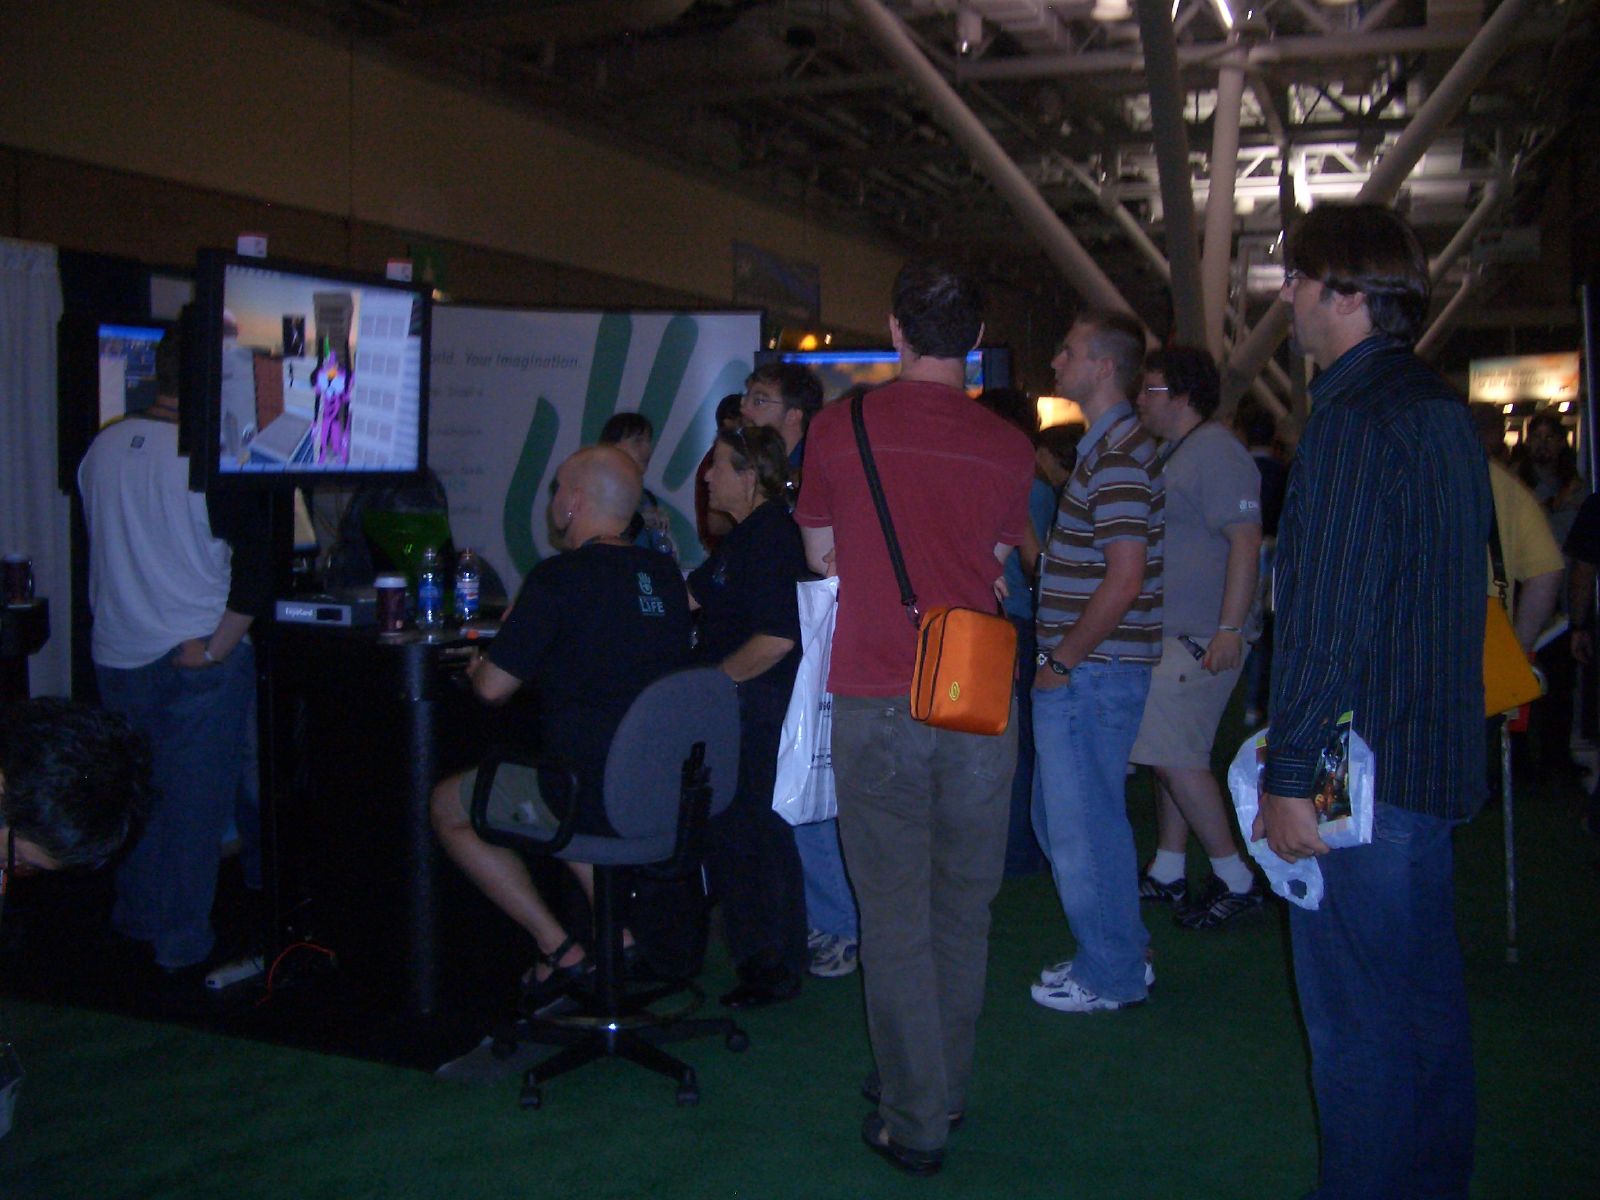 people are standing around watching tv in an event